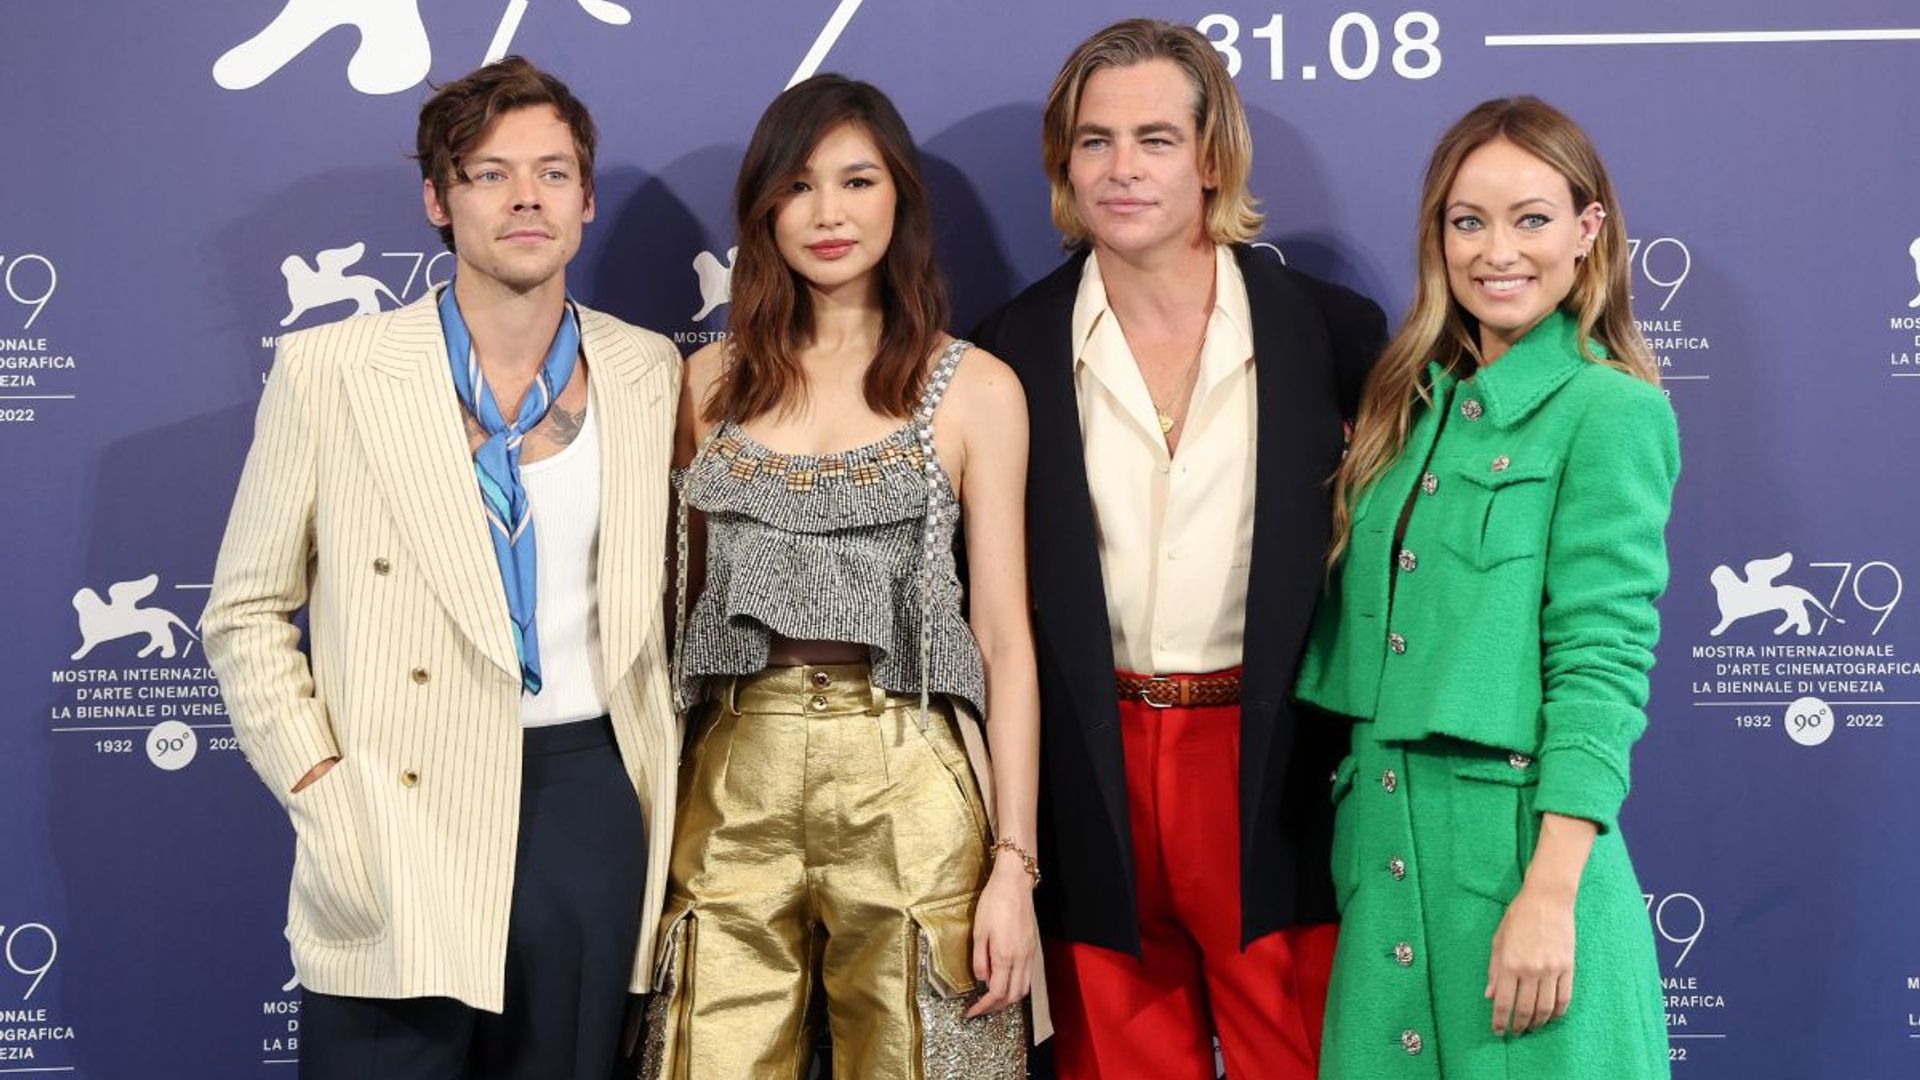 Harry Styles And Olivia Wilde Make A Very Stylish First Joint Appearance At The Venice Film Festival In Retro Looks See Photos Hello